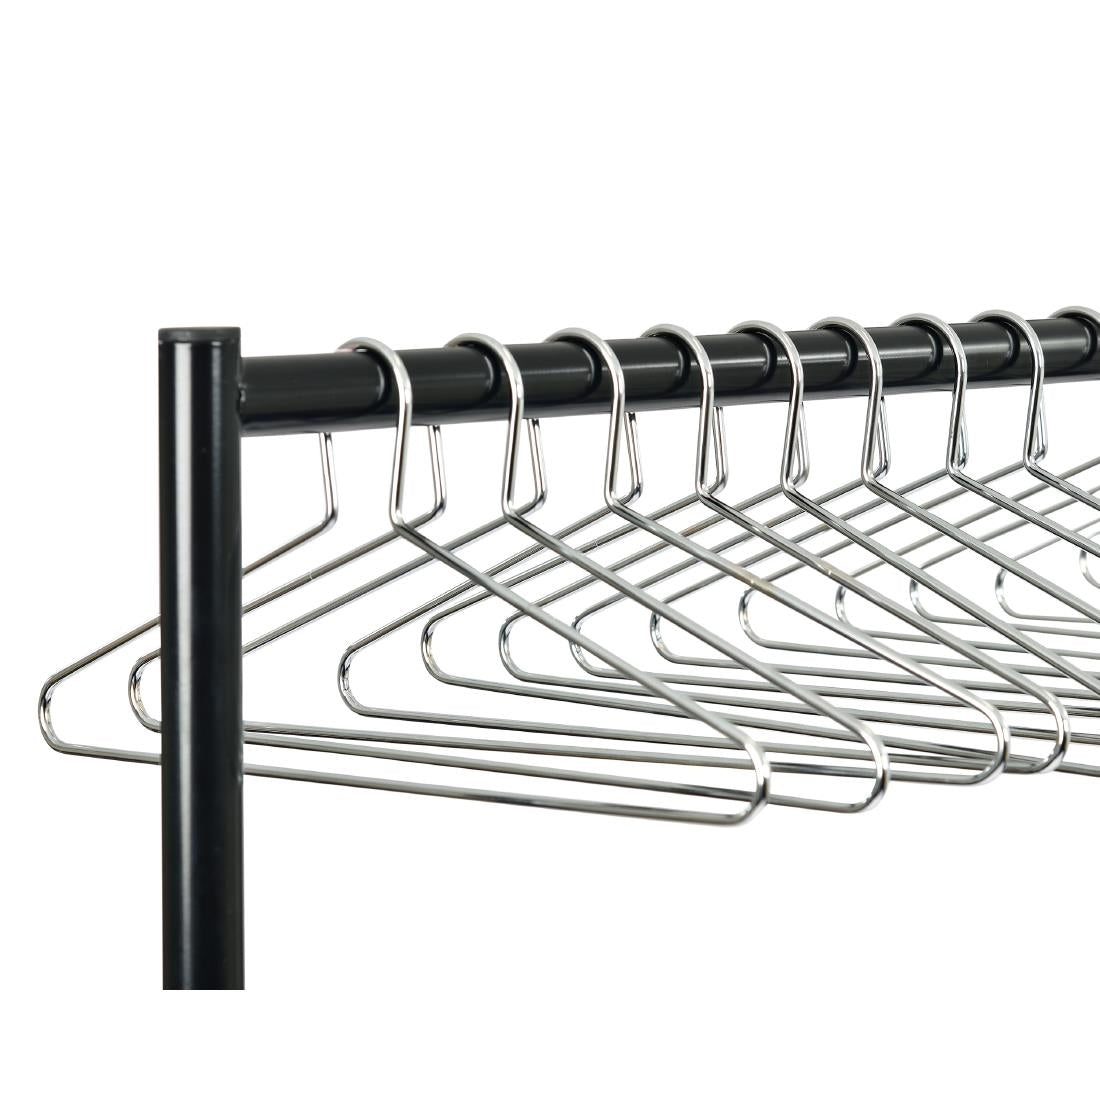 DP715 Chrome Plated Captive Steel Hangers (Pack of 50)